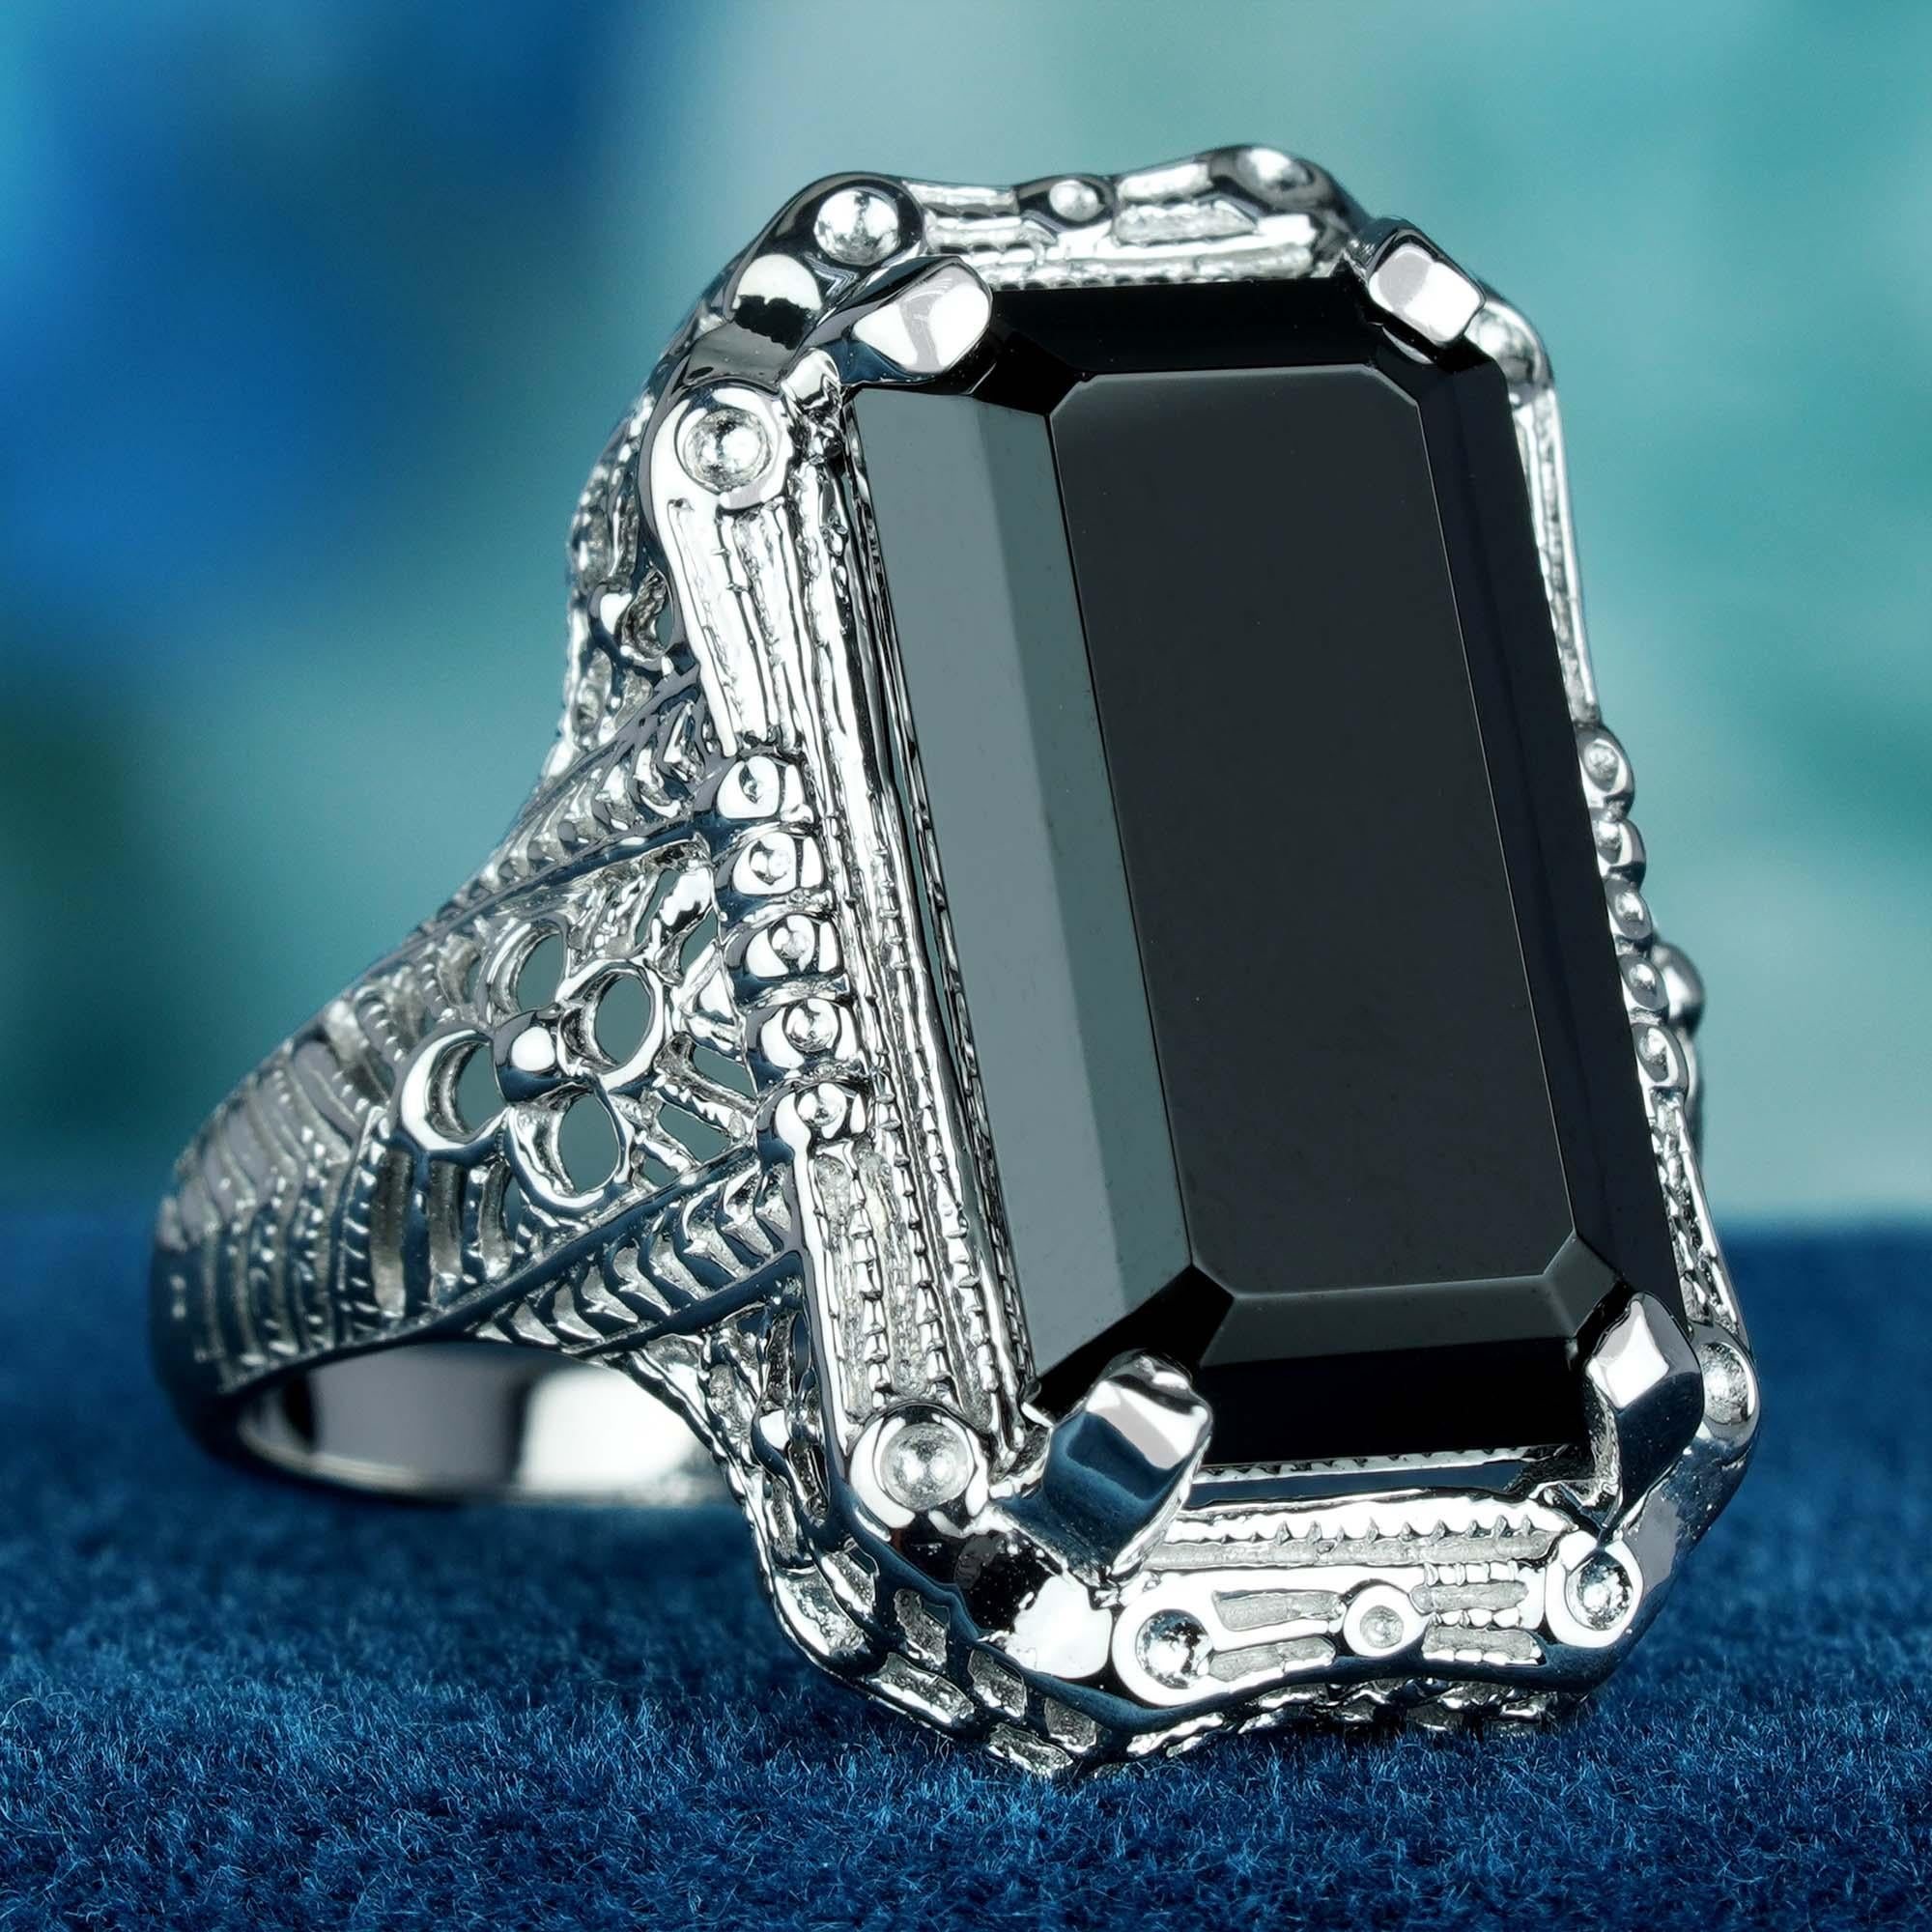 This ring is a truly exquisite piece of jewelry. The band, crafted from solid white gold adorned with a delicate filigree design that is reminiscent of vintage lace features a mesmerizing emerald-cut black onyx gemstone that weighs a full 10 carats.